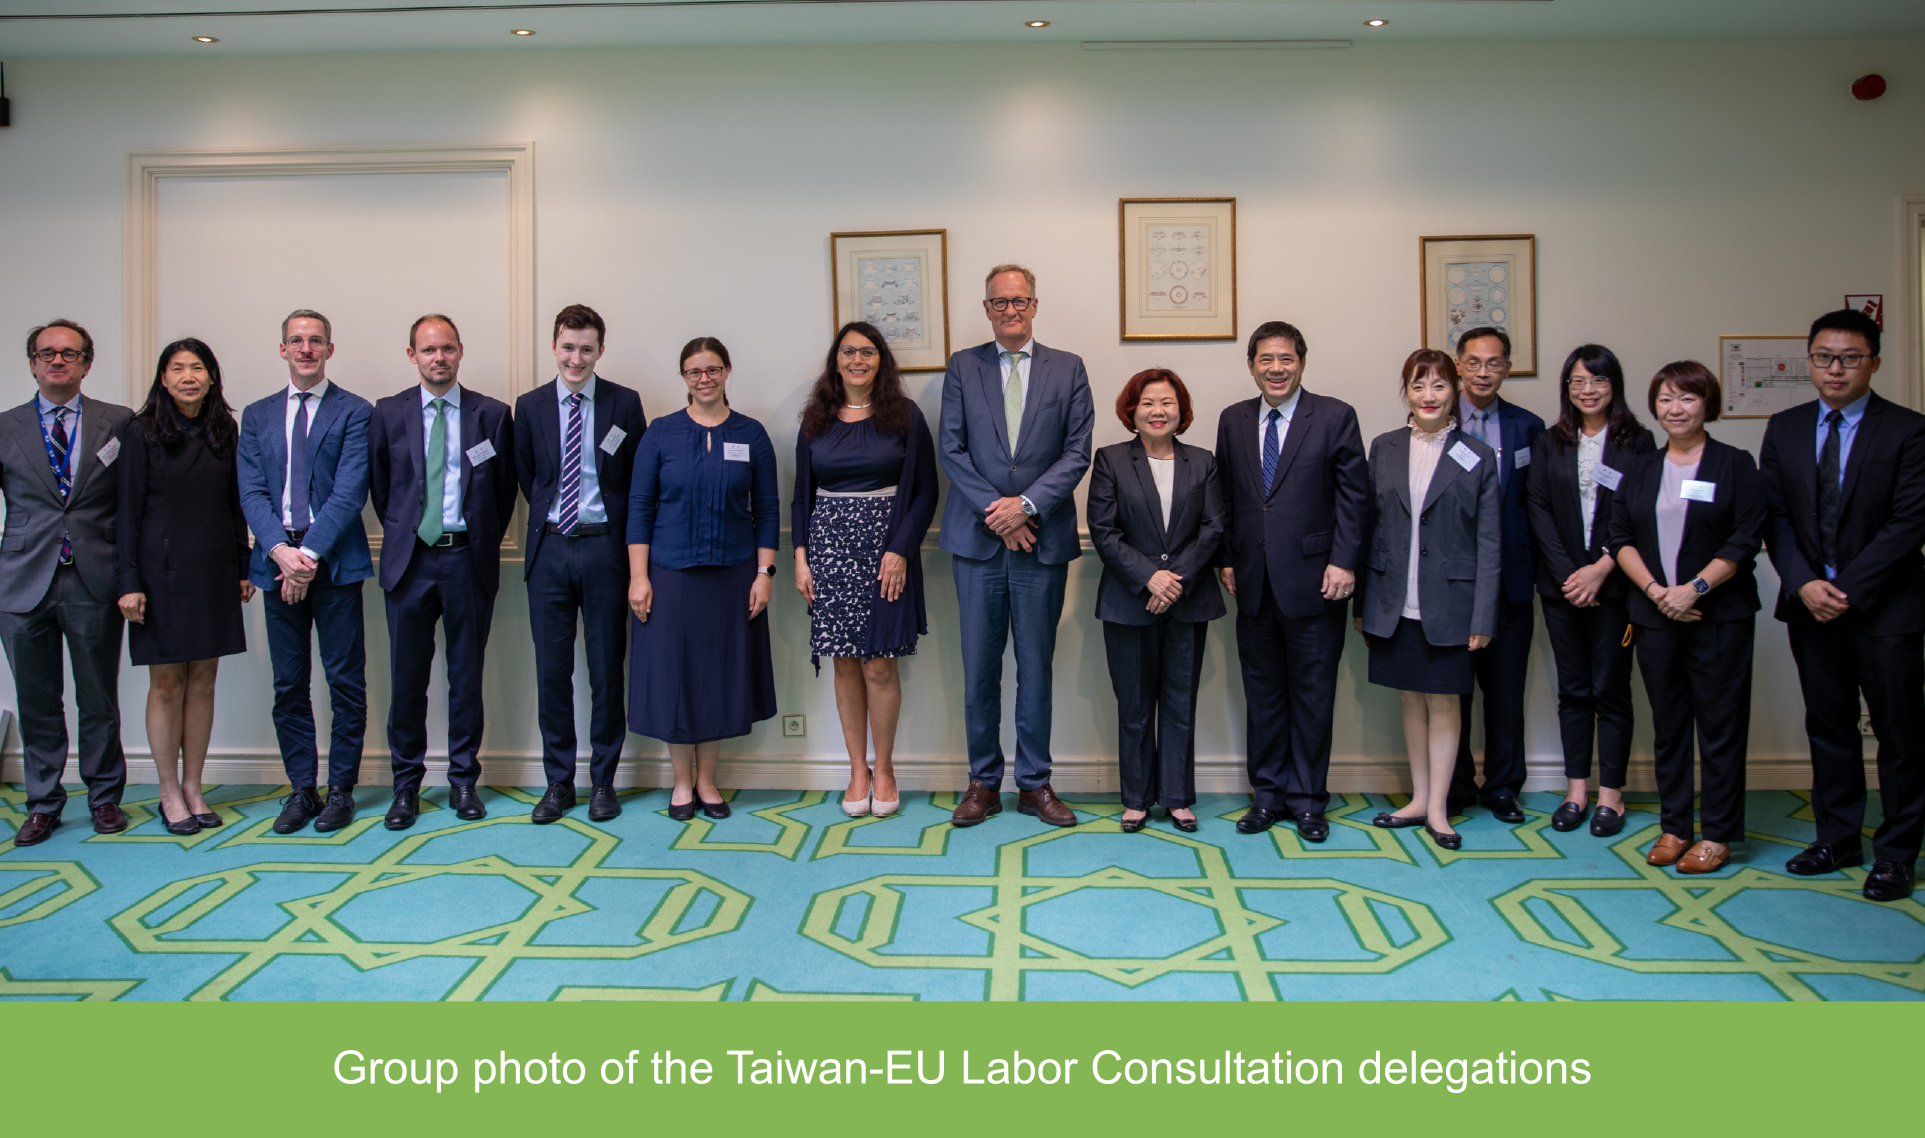 First in Person Meeting between Heads of Taiwan and EU Labor Authorities: Jointly Hosting the 5th Taiwan-EU Labor Consultation